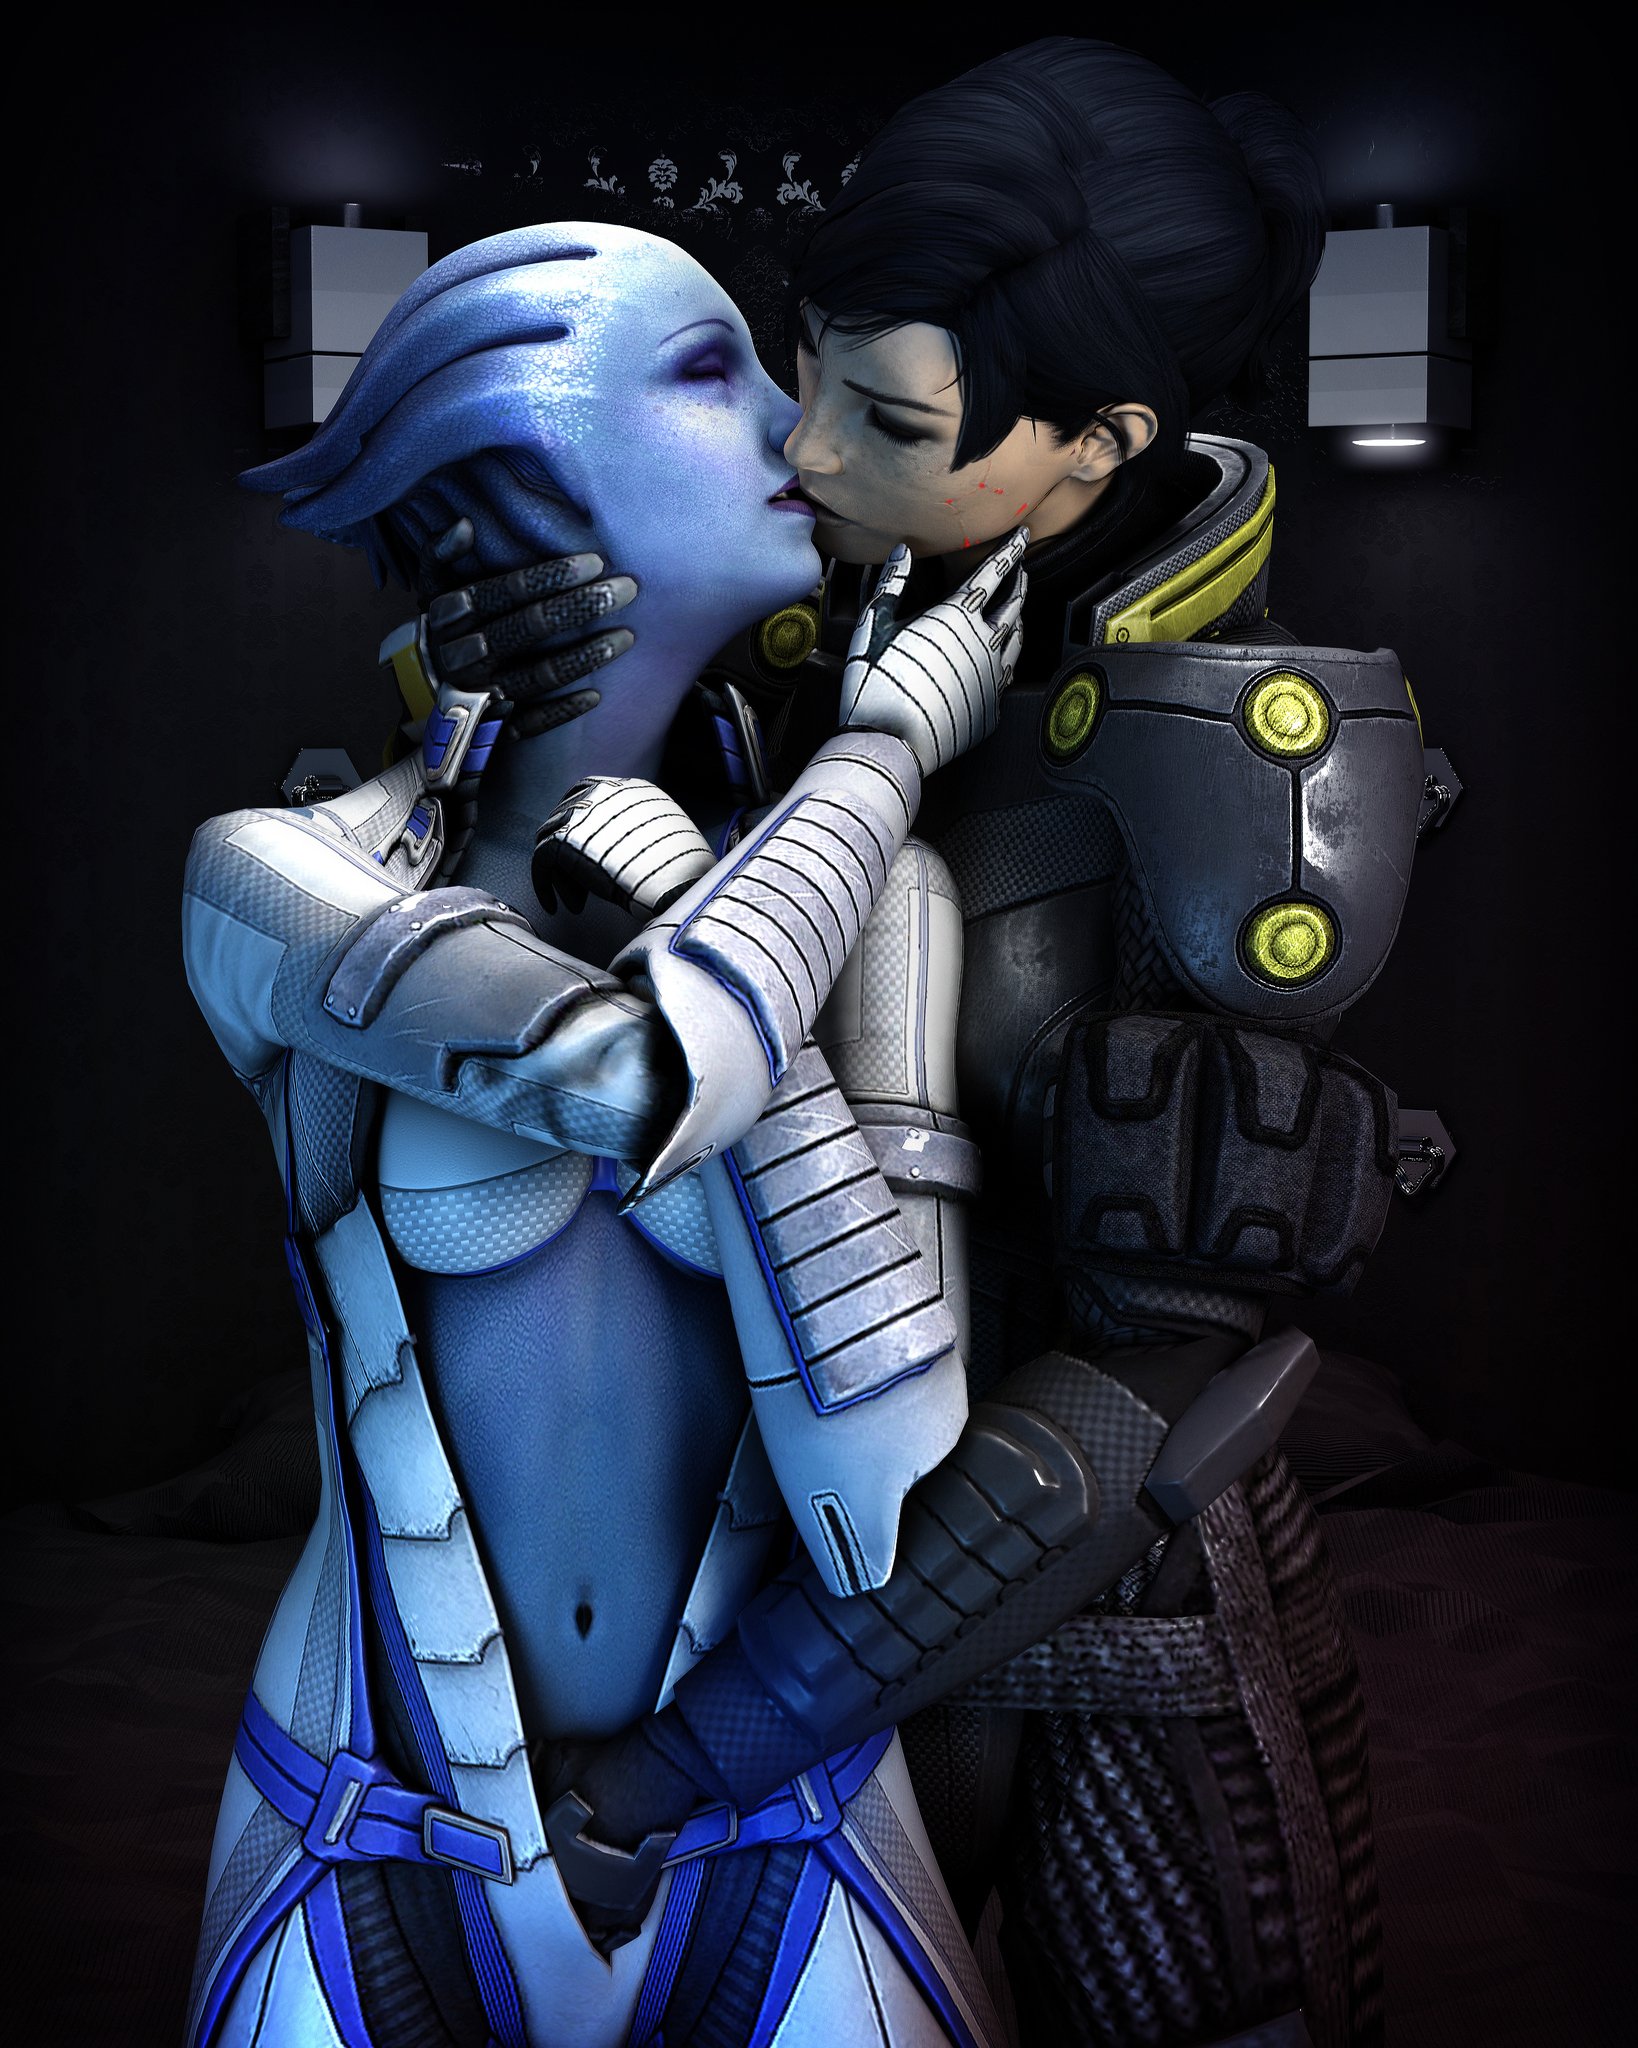 Kira and Liara together in first time after her resurrection